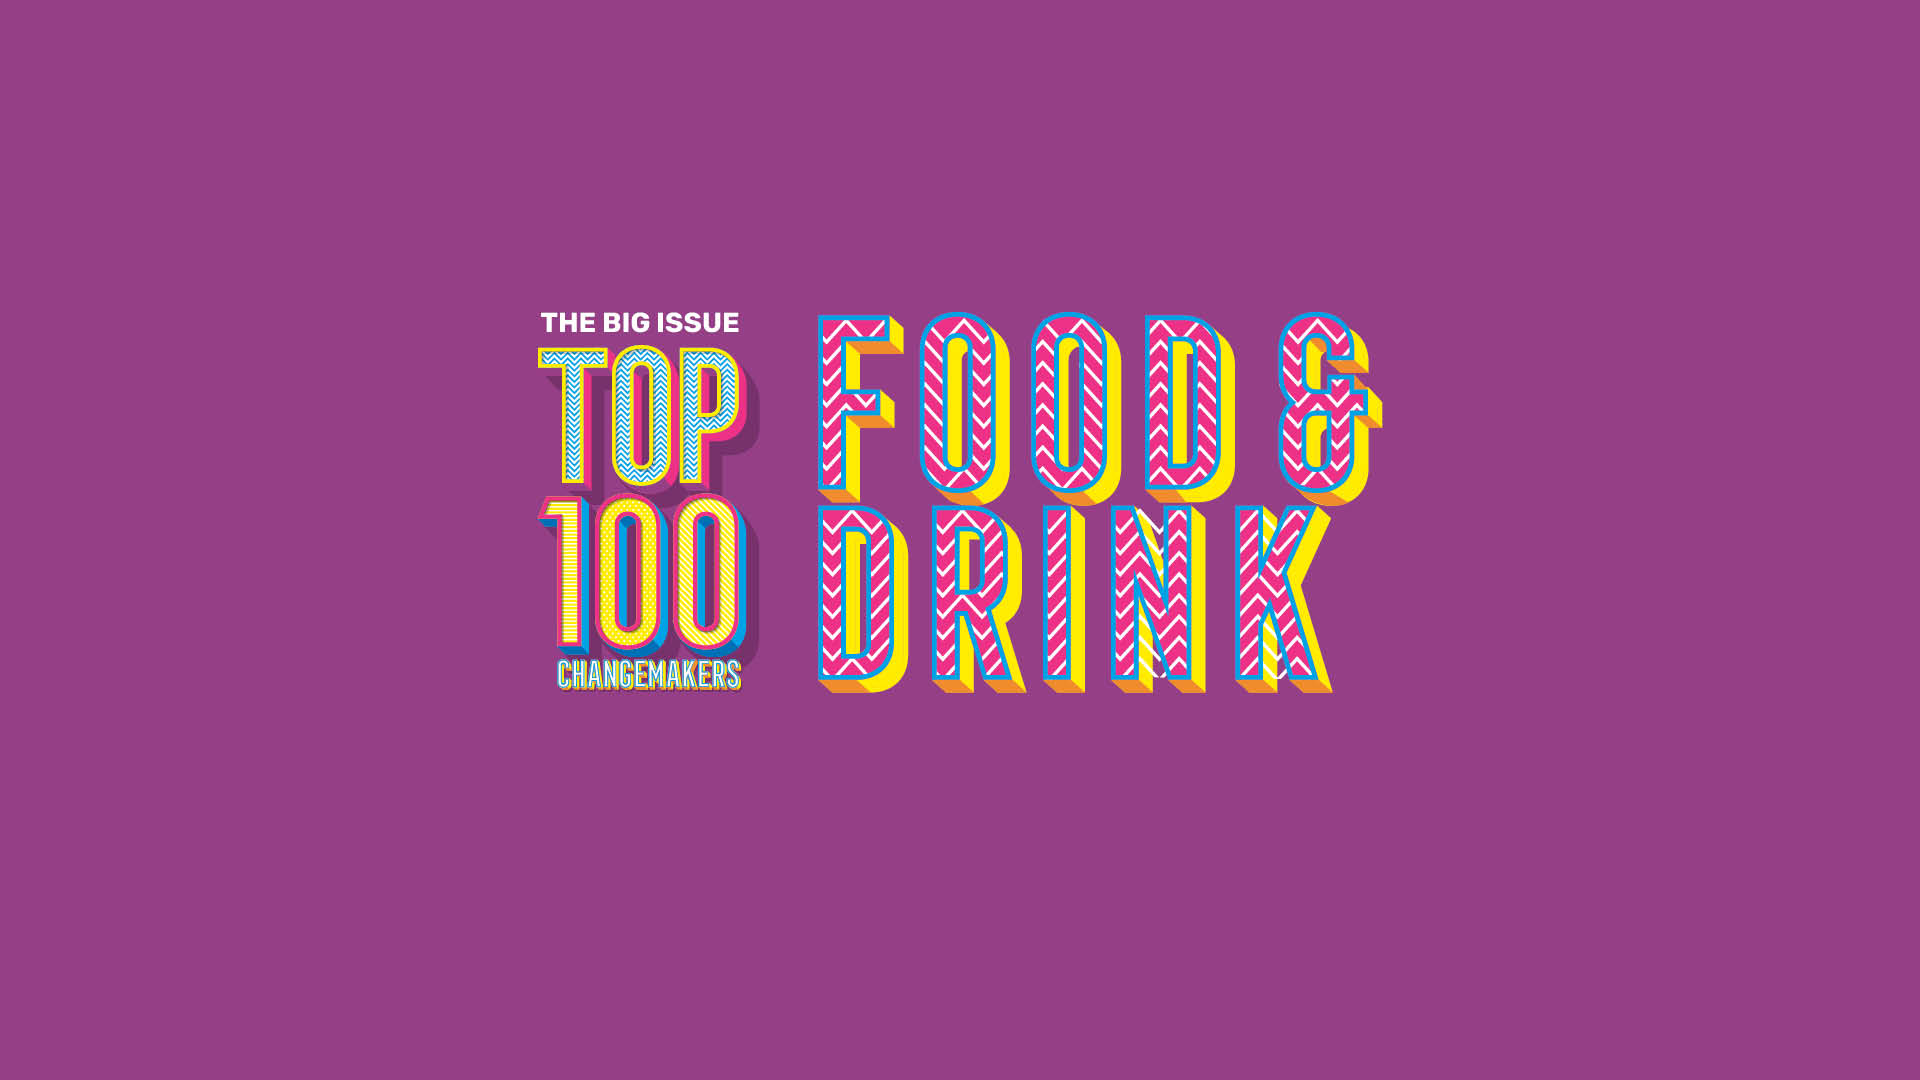 The Big Issue Top 100 Changemakers 2019: Food and Drink